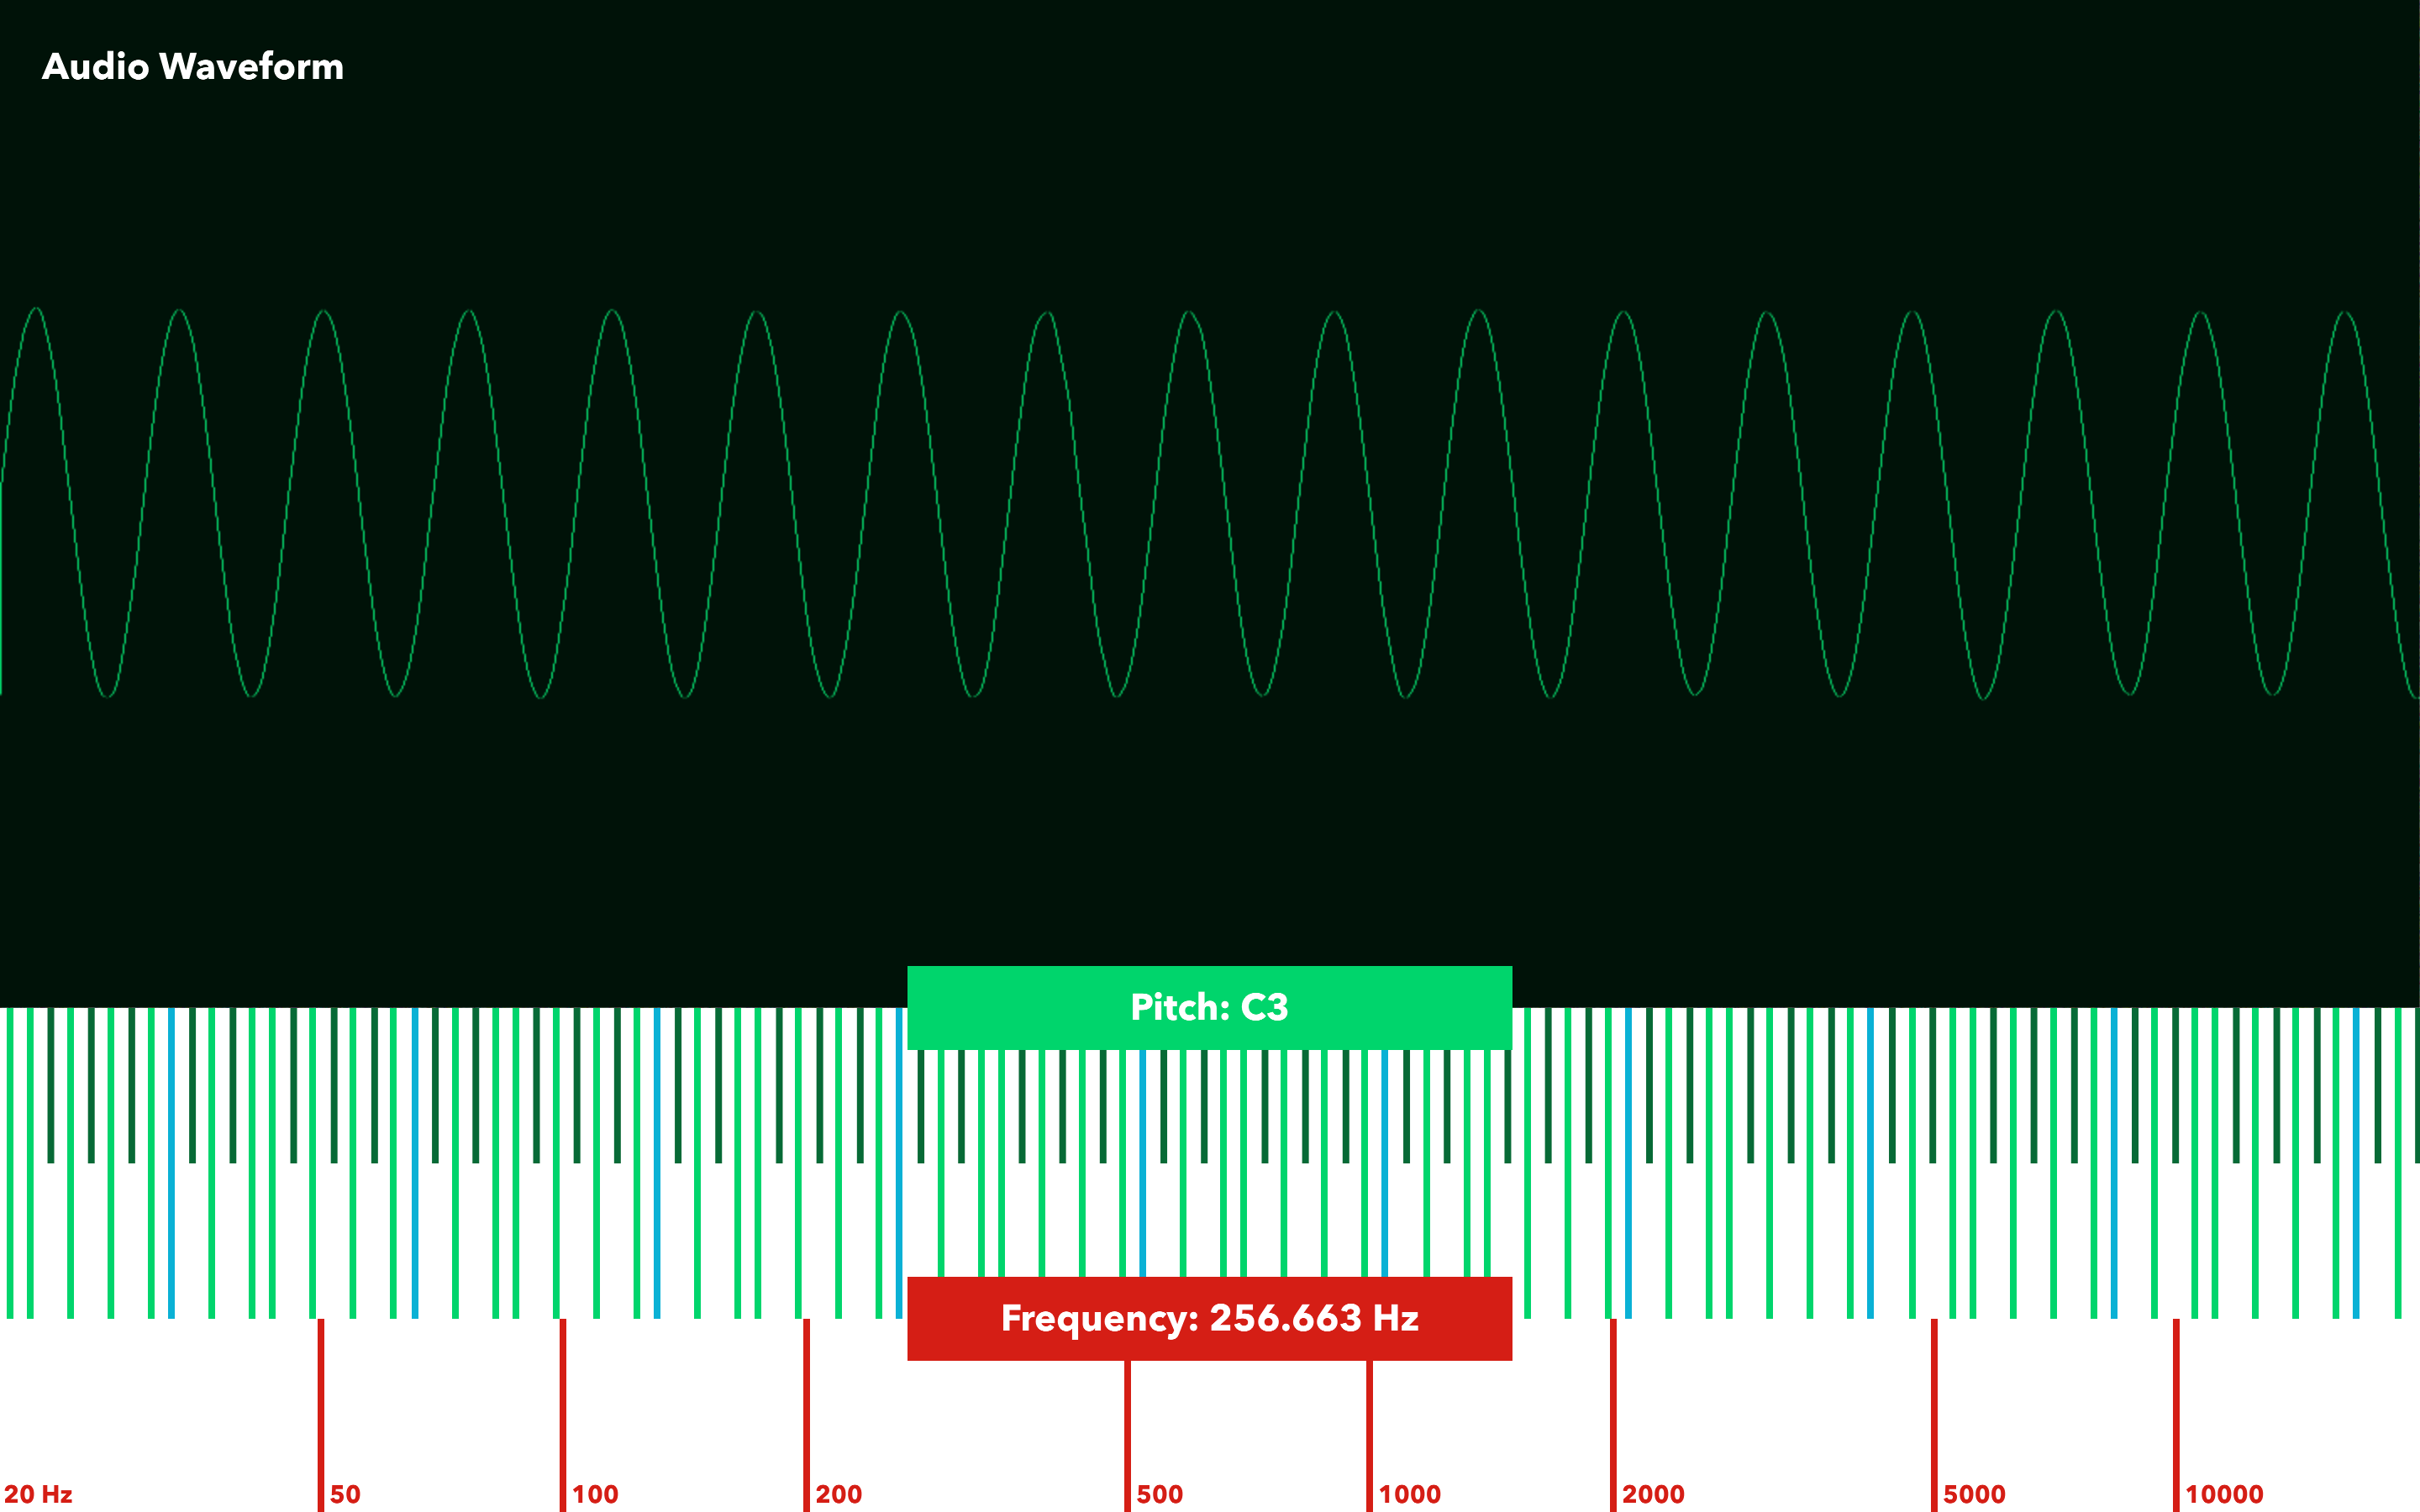 Screenshot of the Measuring Sound app UI which shows an oscilloscope and two legends showing pitch and frequency which correspond to touch screen position.